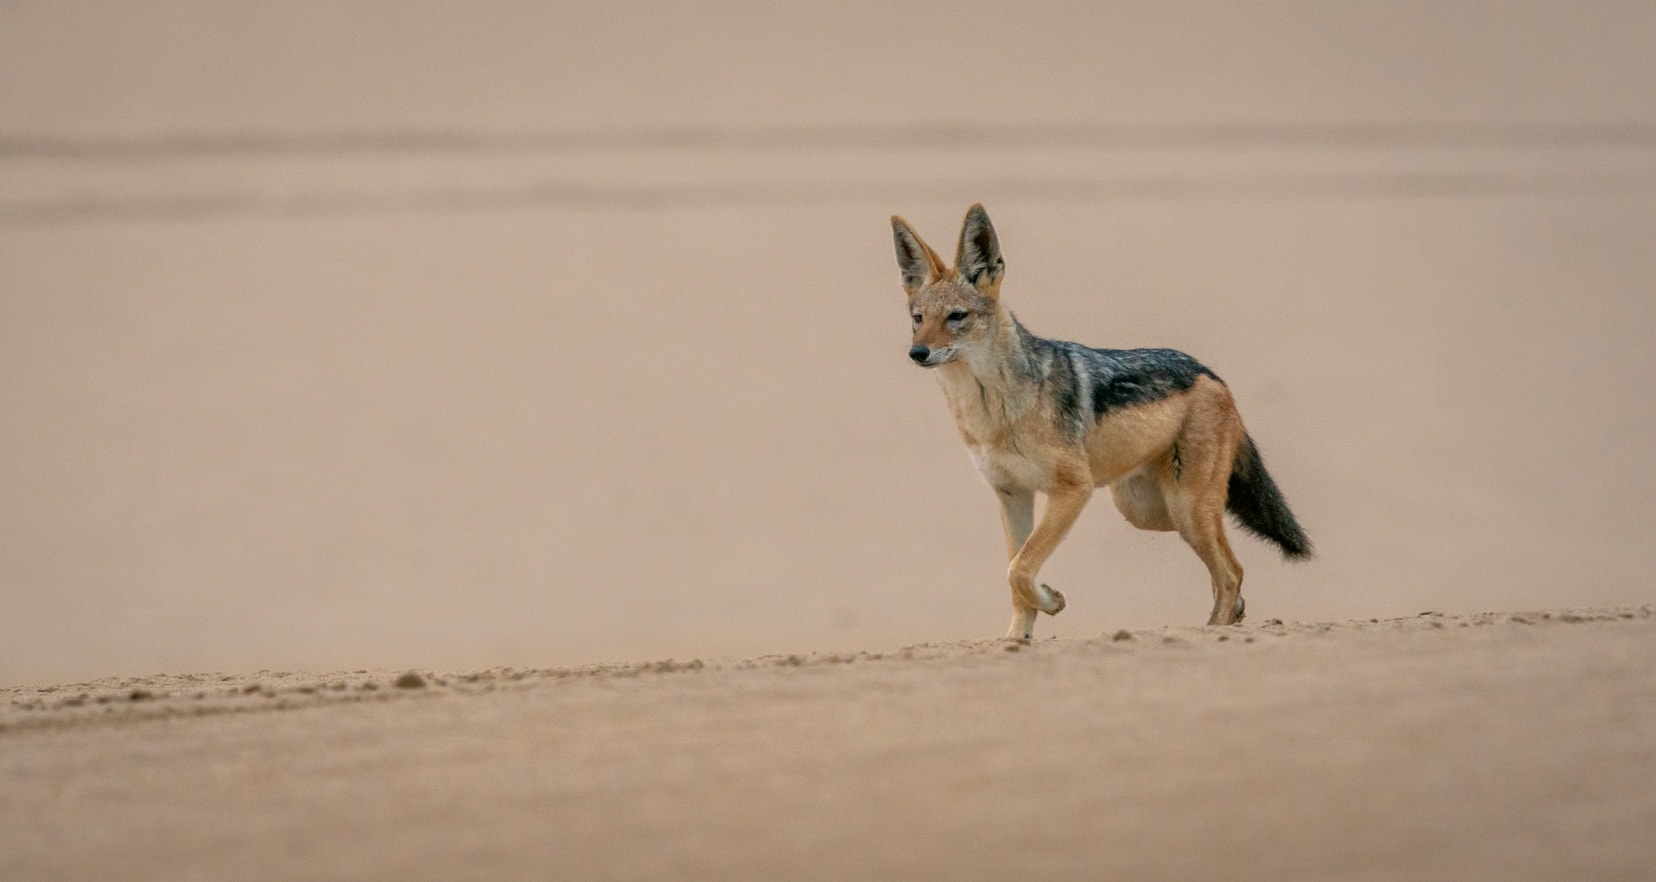 Black-backed-jackal-with-paw-up in the sand-dunes